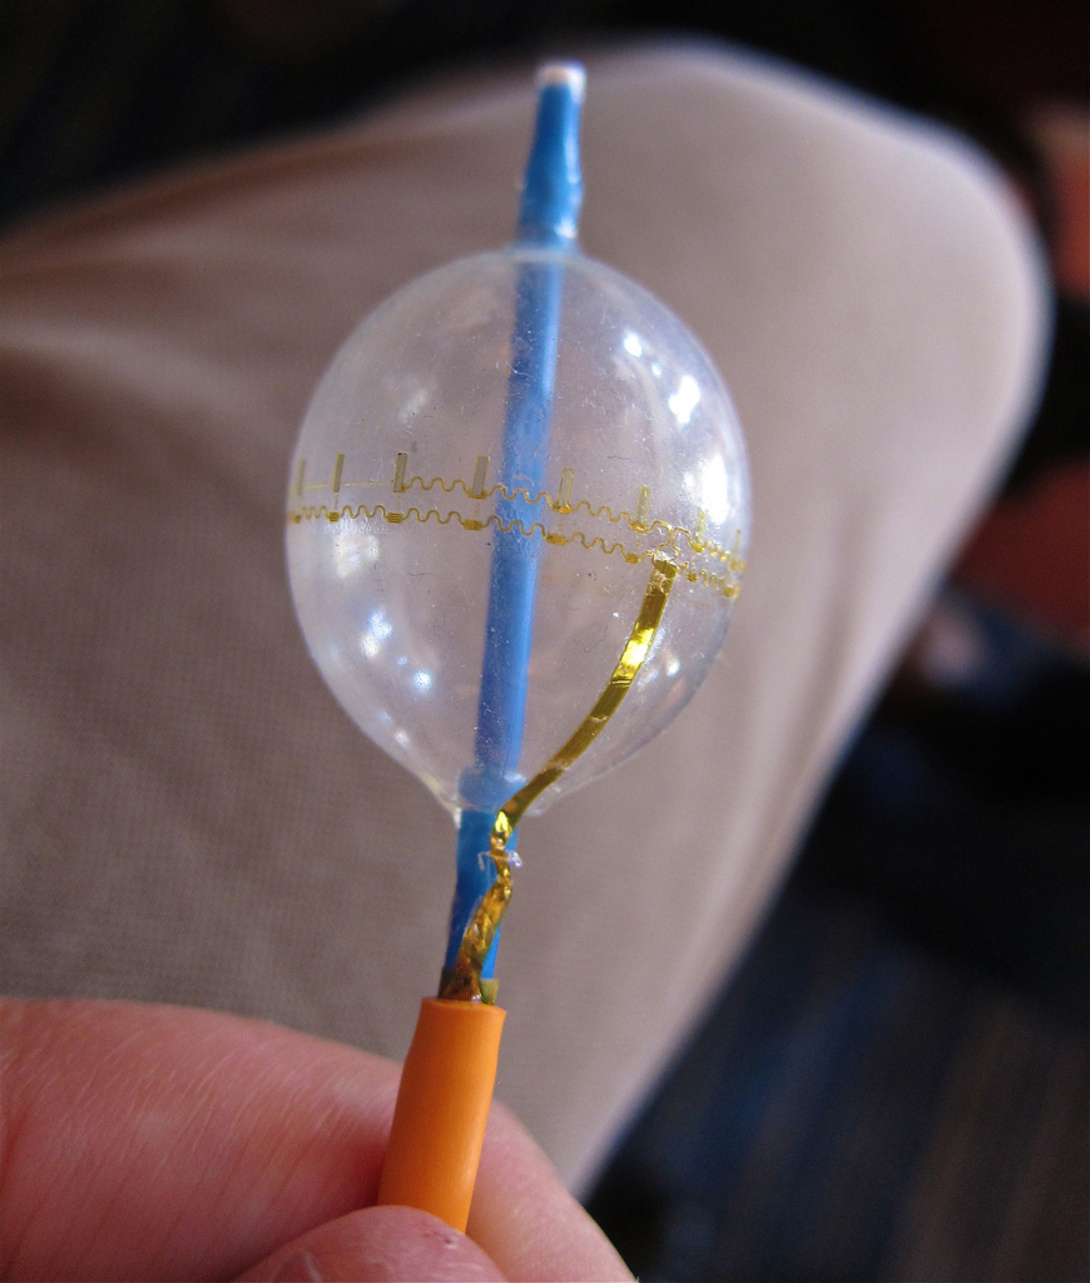 Temperature and EKG sensors and LEDs wrapped around a cardiac balloon catheter. The wires are stretchable coils. Image: jurvetson